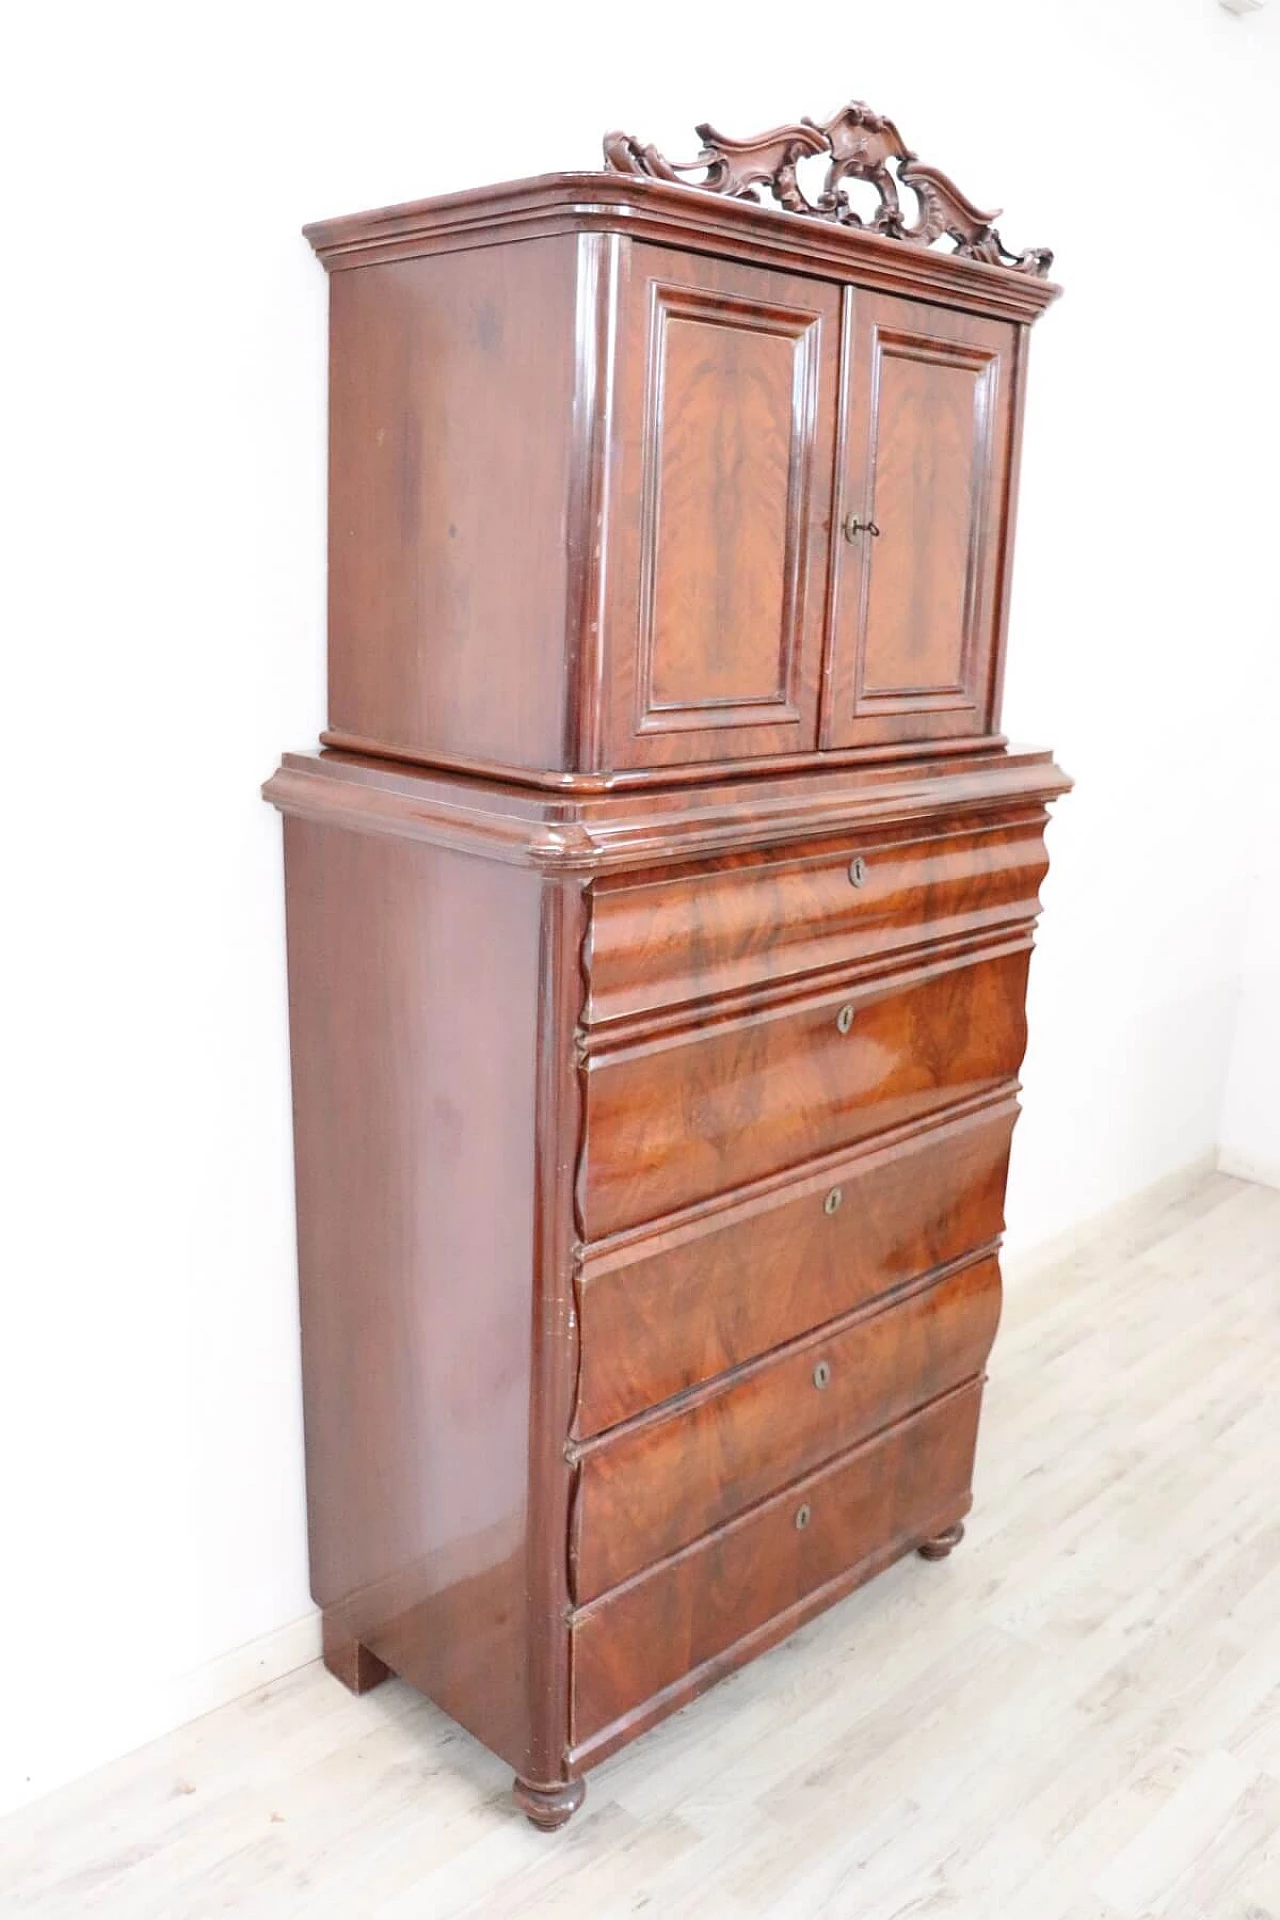 Antique chest of drawers with mahogany riser, 19th century 1067724